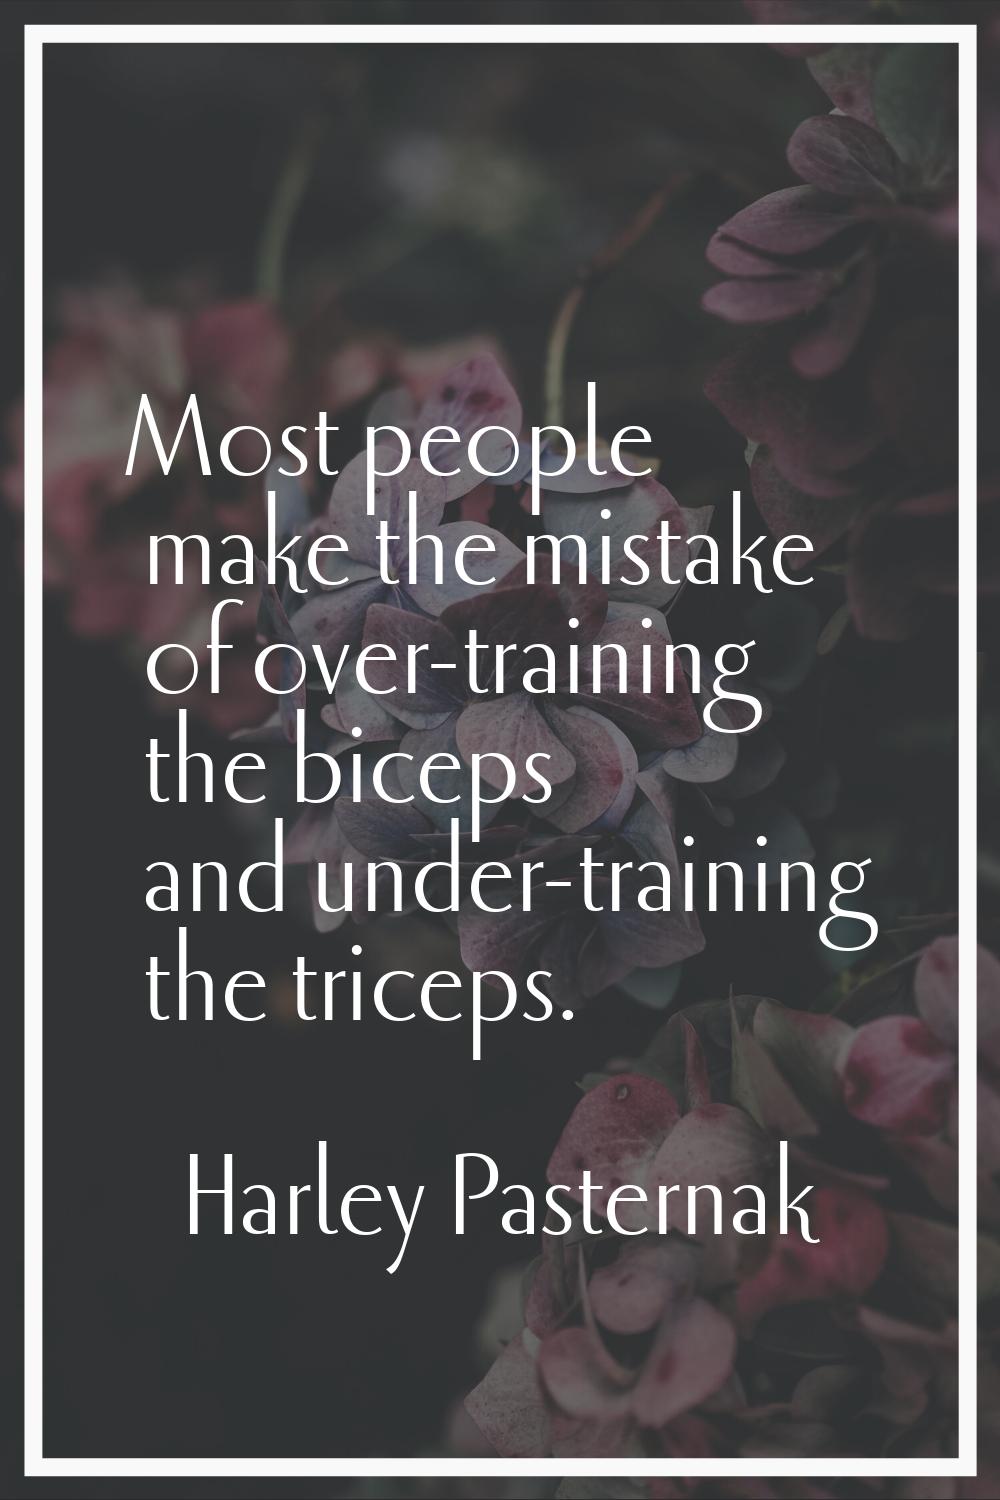 Most people make the mistake of over-training the biceps and under-training the triceps.